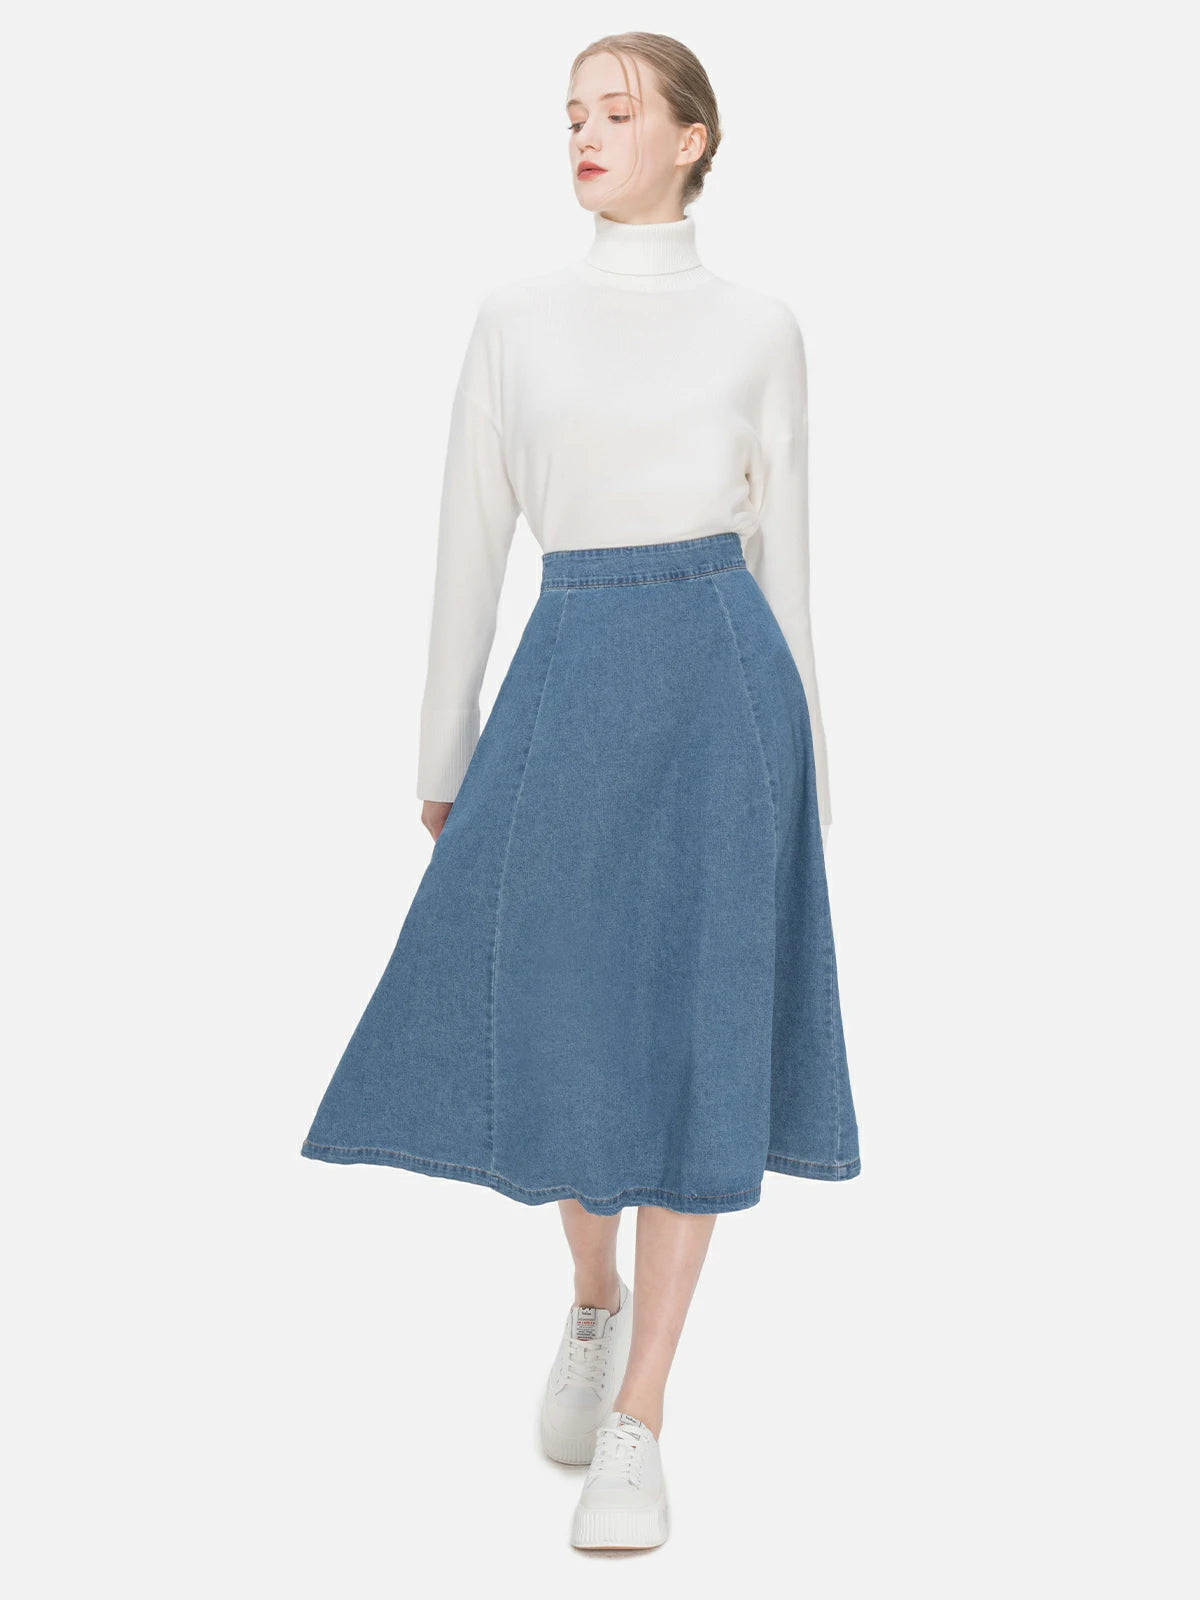 Timeless charm embodied in a blue denim A-line skirt with classic design, high waist, and versatile fashion, ensuring a comfortable and stylish fit for everyday use.